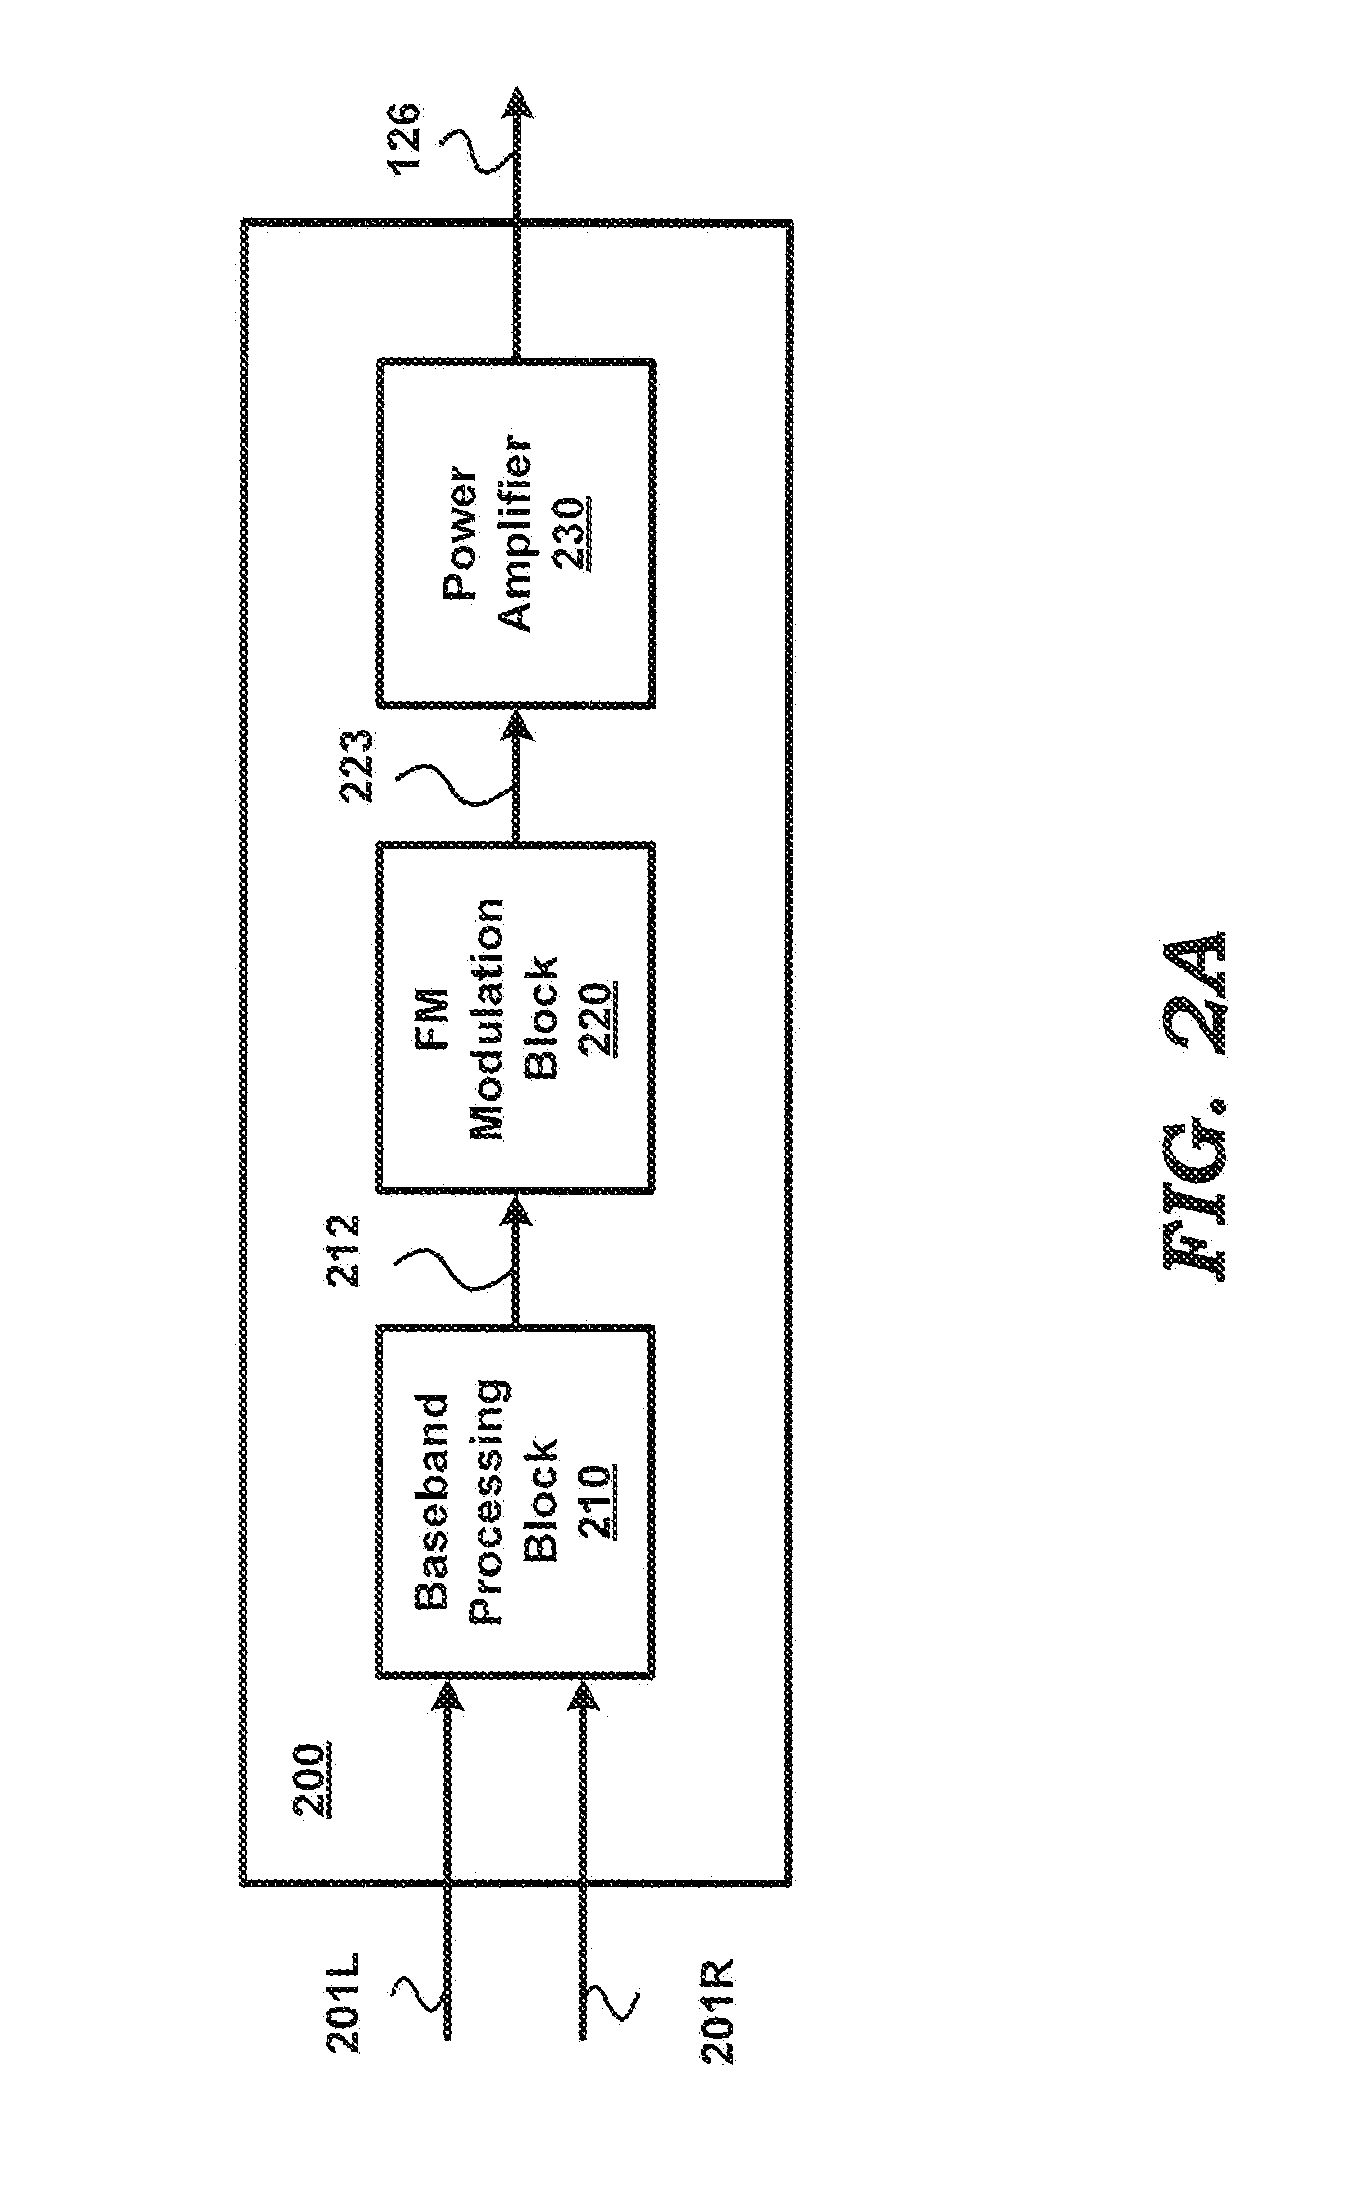 Controlling Over-Modulation in FM Transmitters